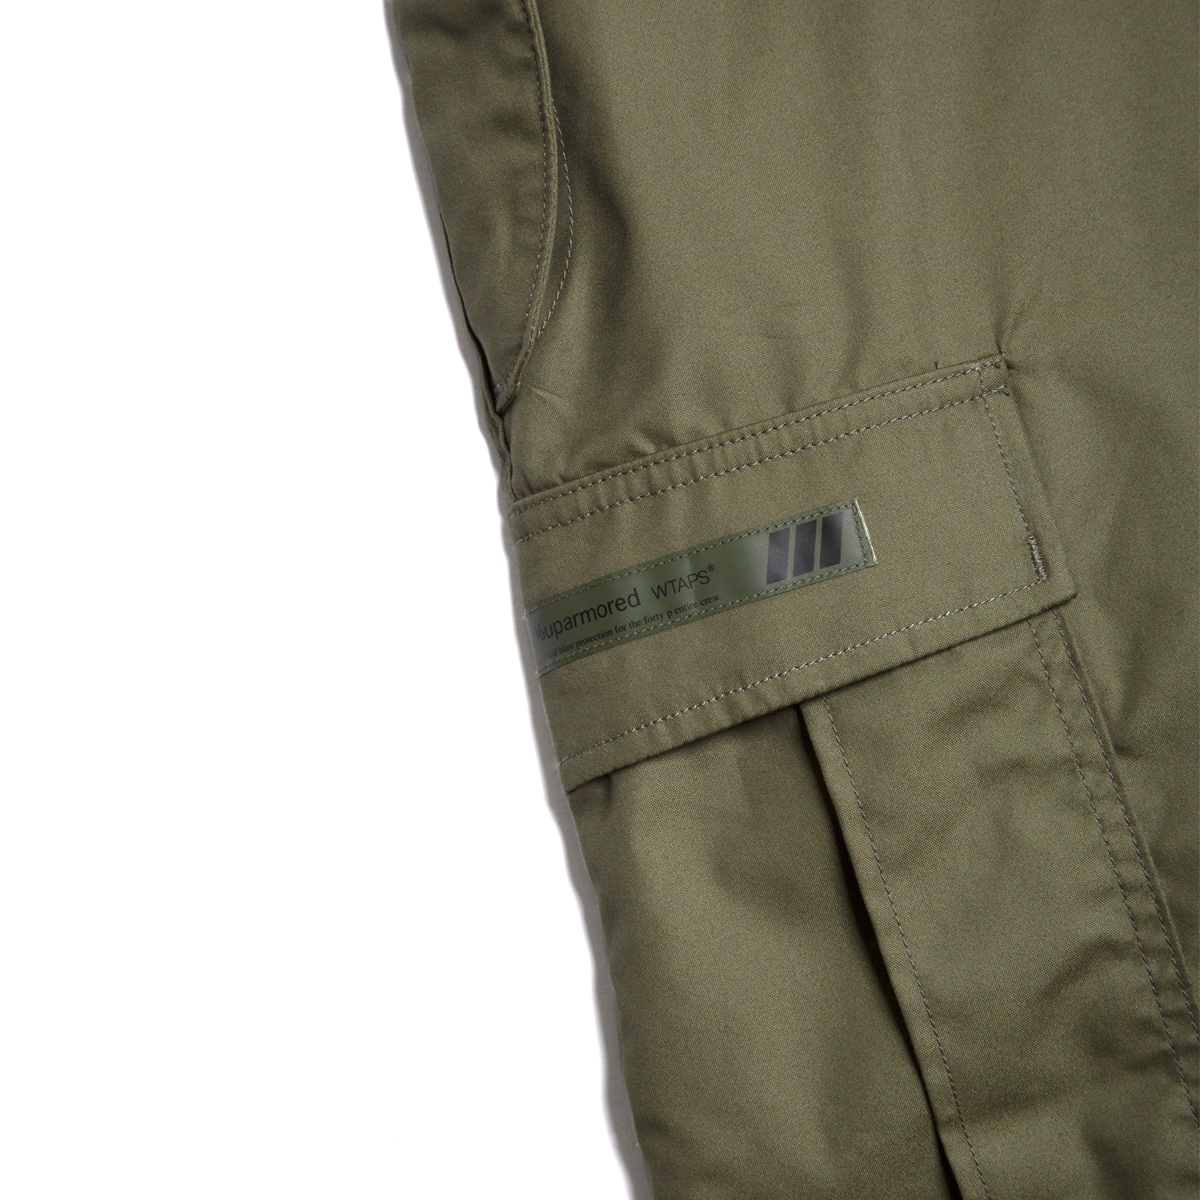 WTAPS : MILS0001 / SHORTS / NYCO. OXFORD – BELIEF MOSCOW